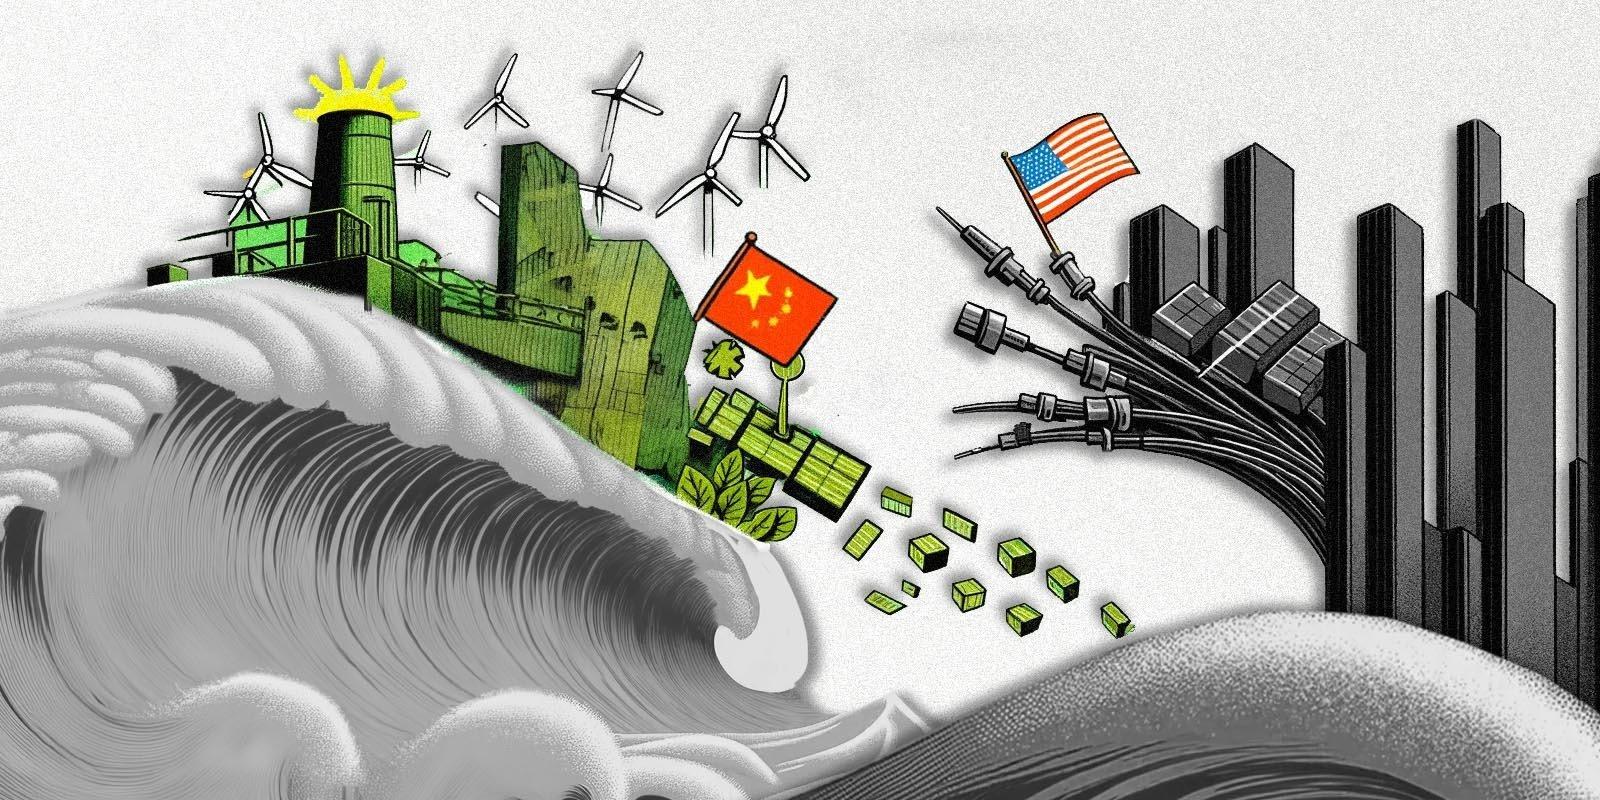 The US Warned China About Flooding The Market With Cheap Clean Energy Products